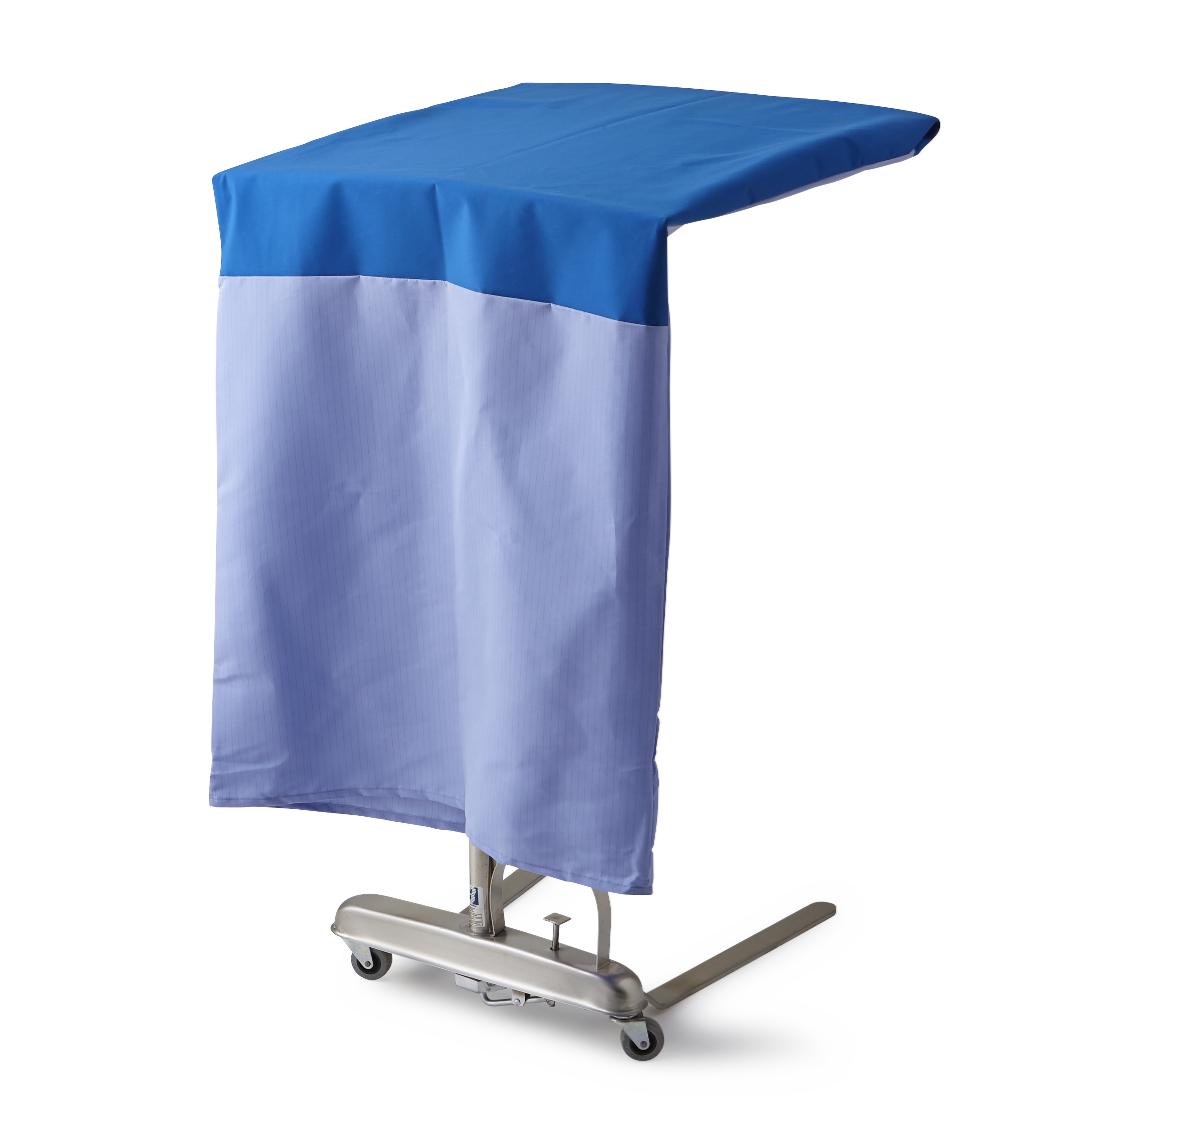 Reusable cloth Surgical fenestrated drape